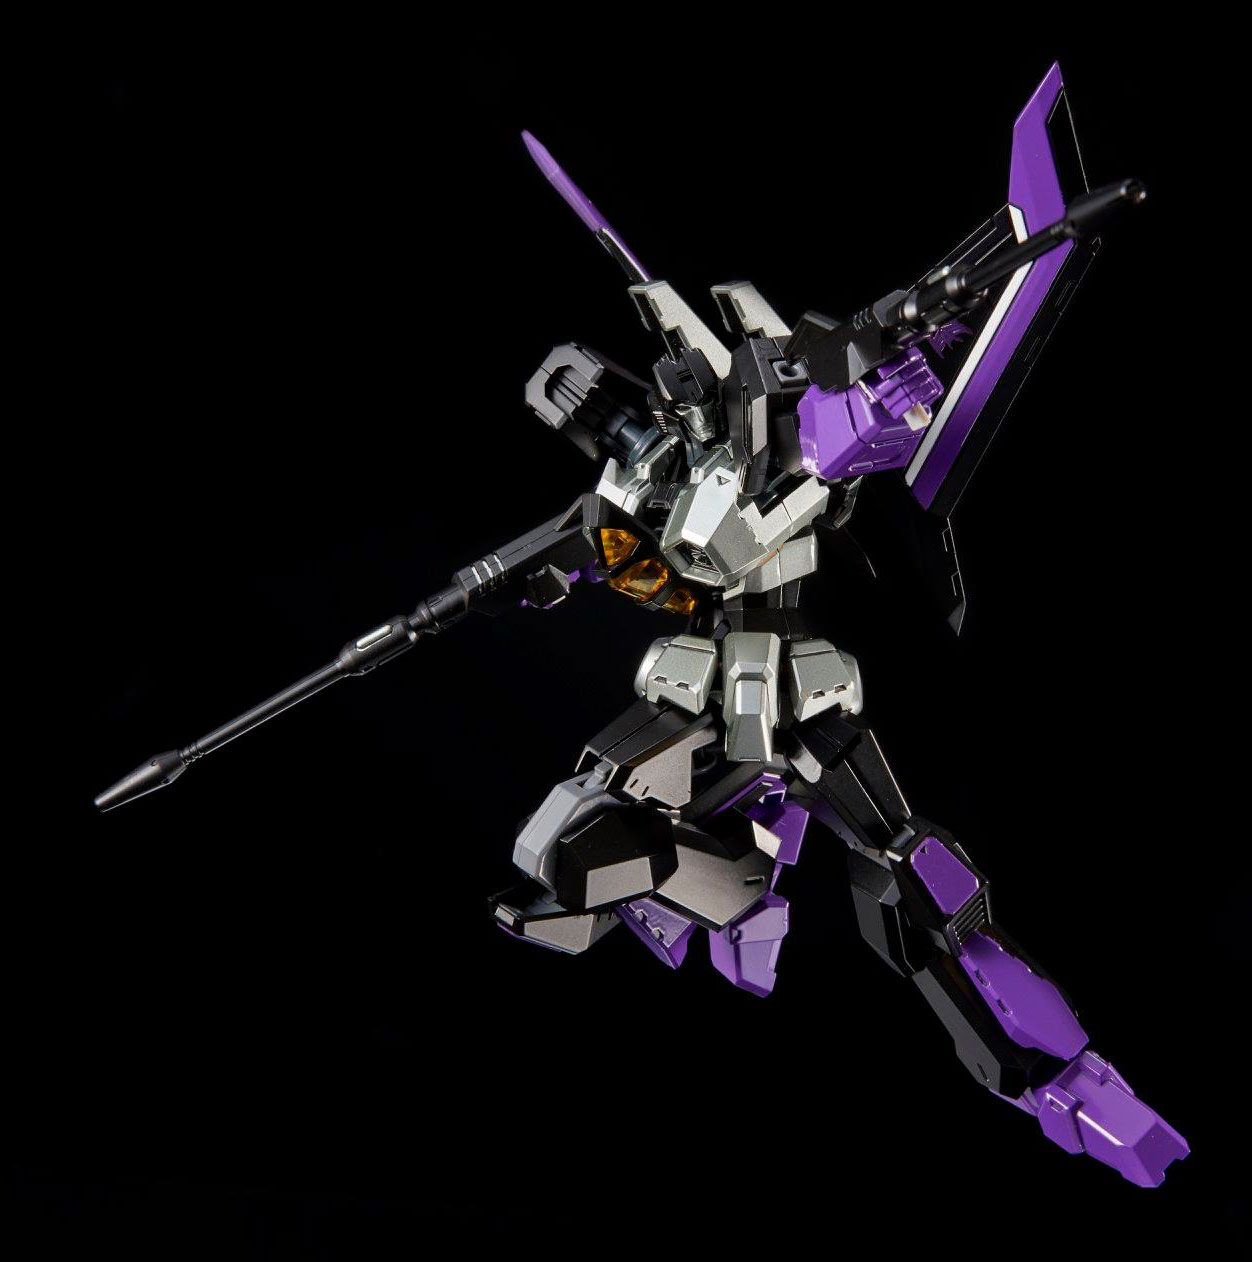 Transformers News: More photos of Flame Toys Furai Transformers Drift and Skywarp in Bluefin Press Release